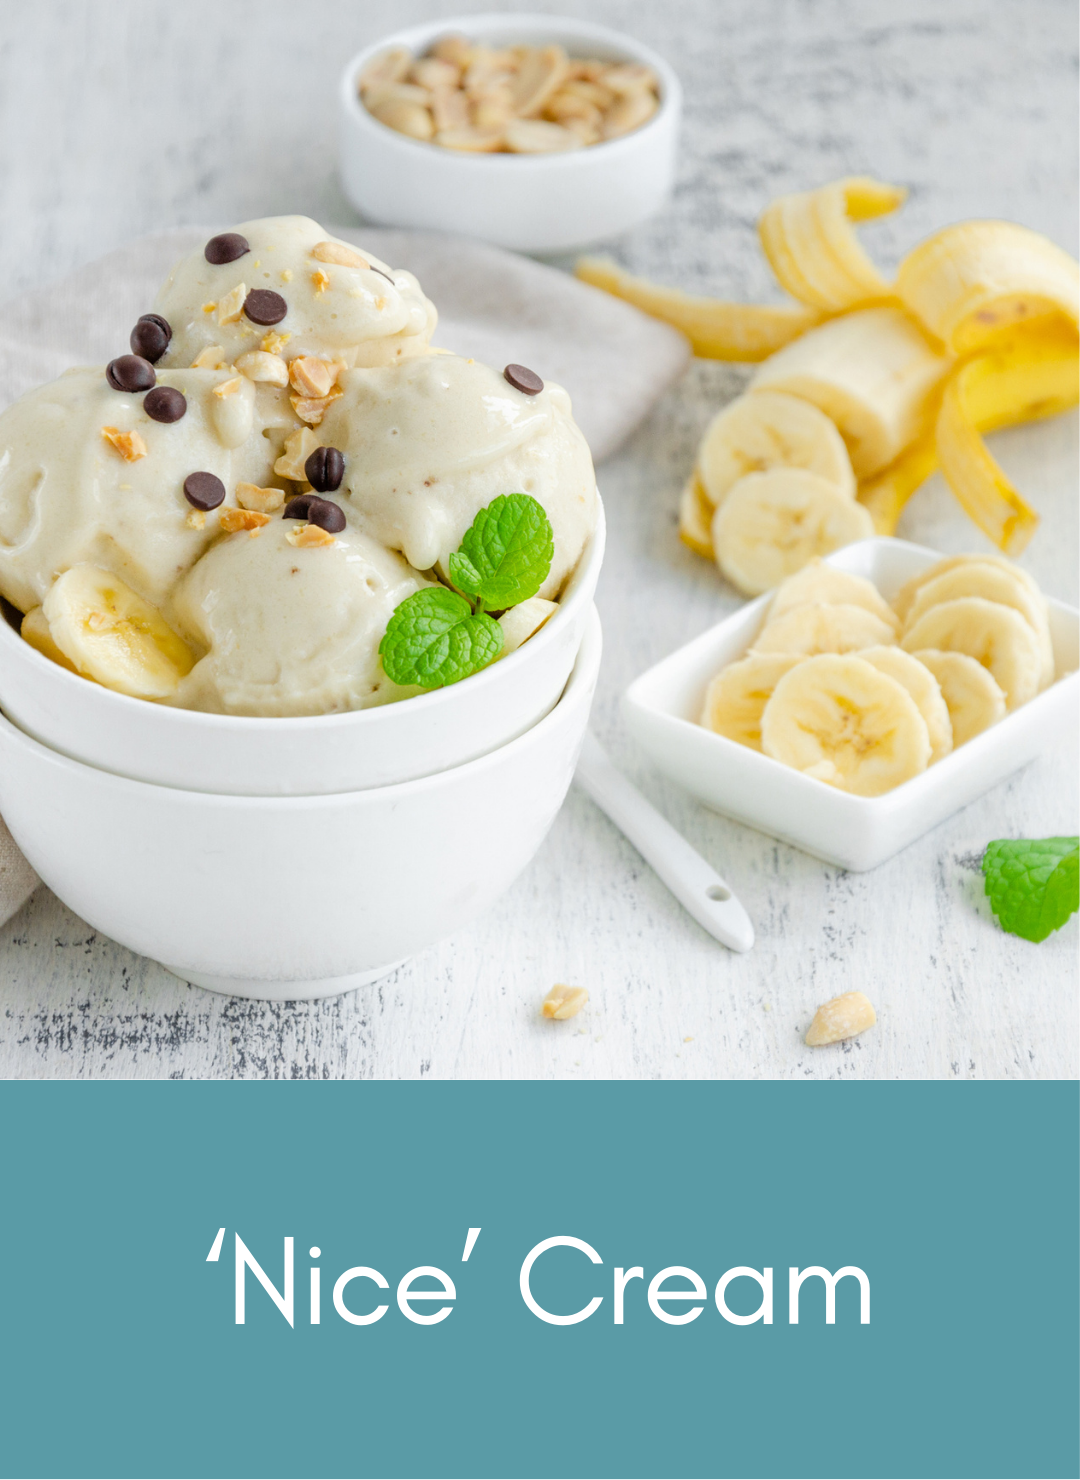 Whole food plant based vegan banana ice cream Picture with link to recipe